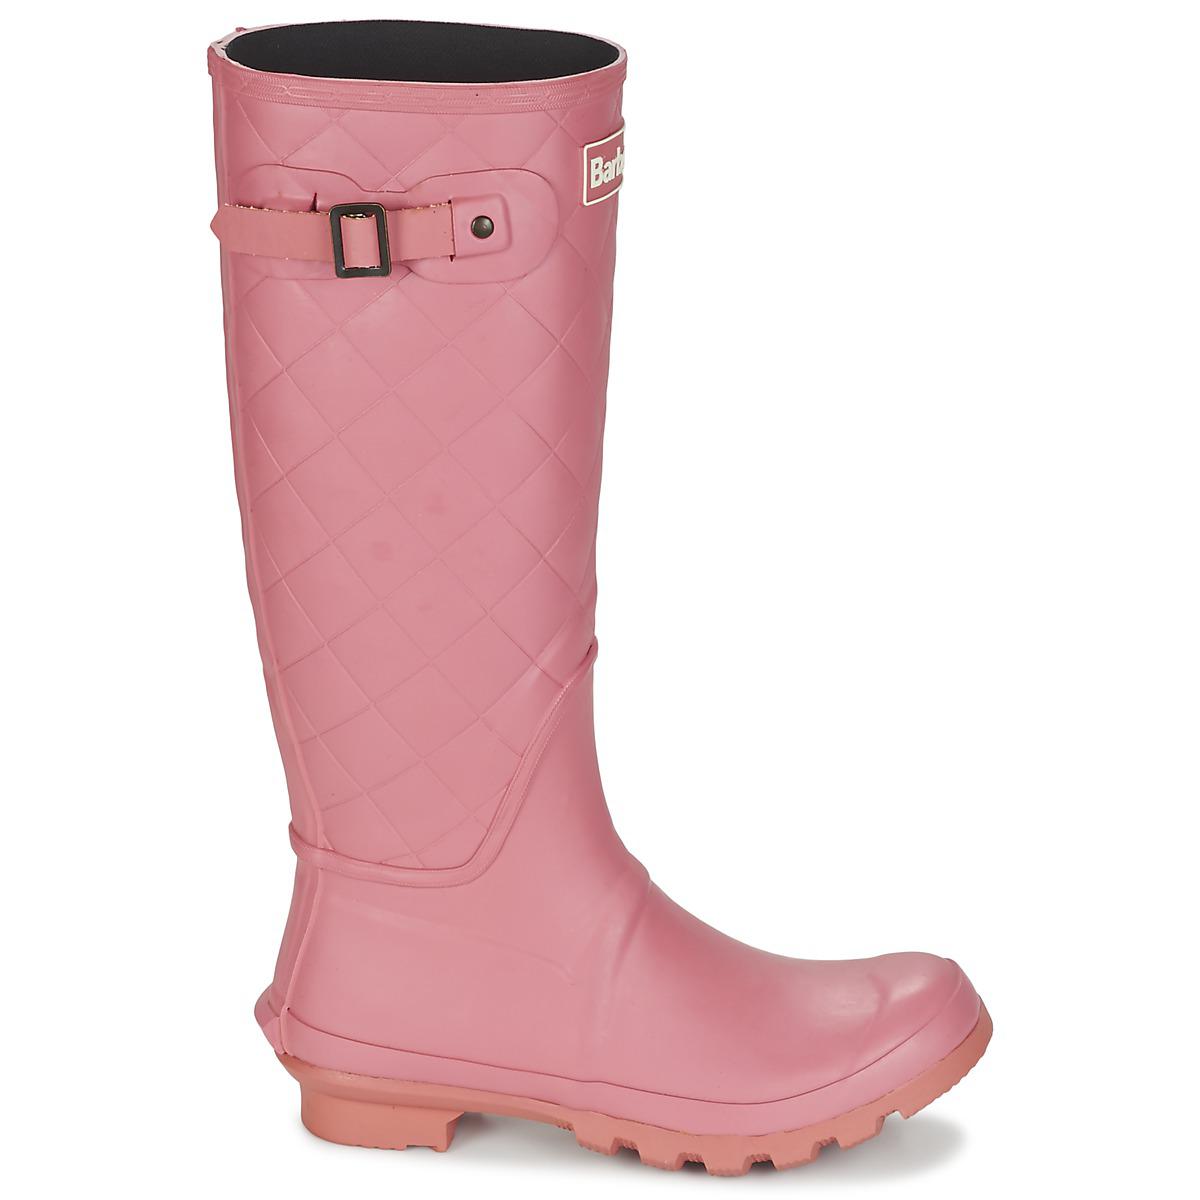 Barbour Setter Wellington Boots in Pink 